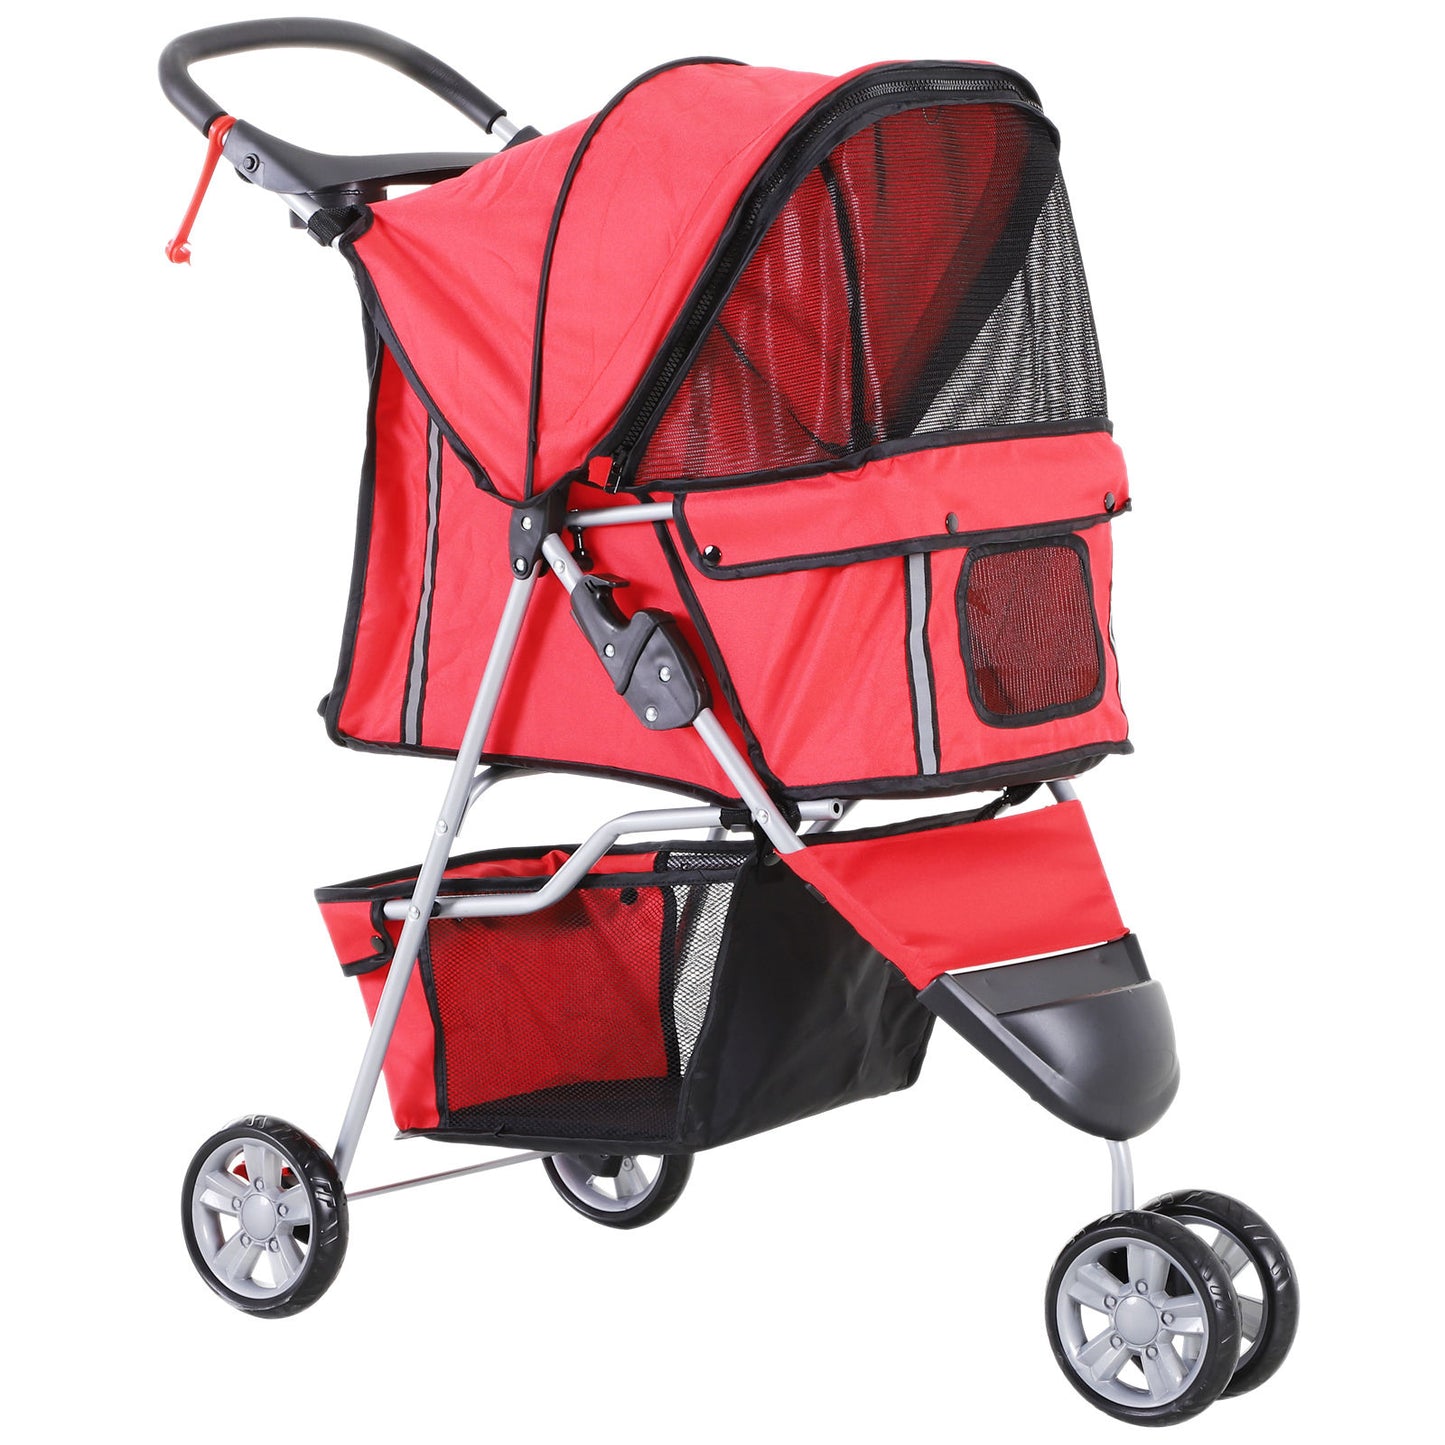 Nancy's The Garden Dog buggy chiens chats multicolore (rouge)